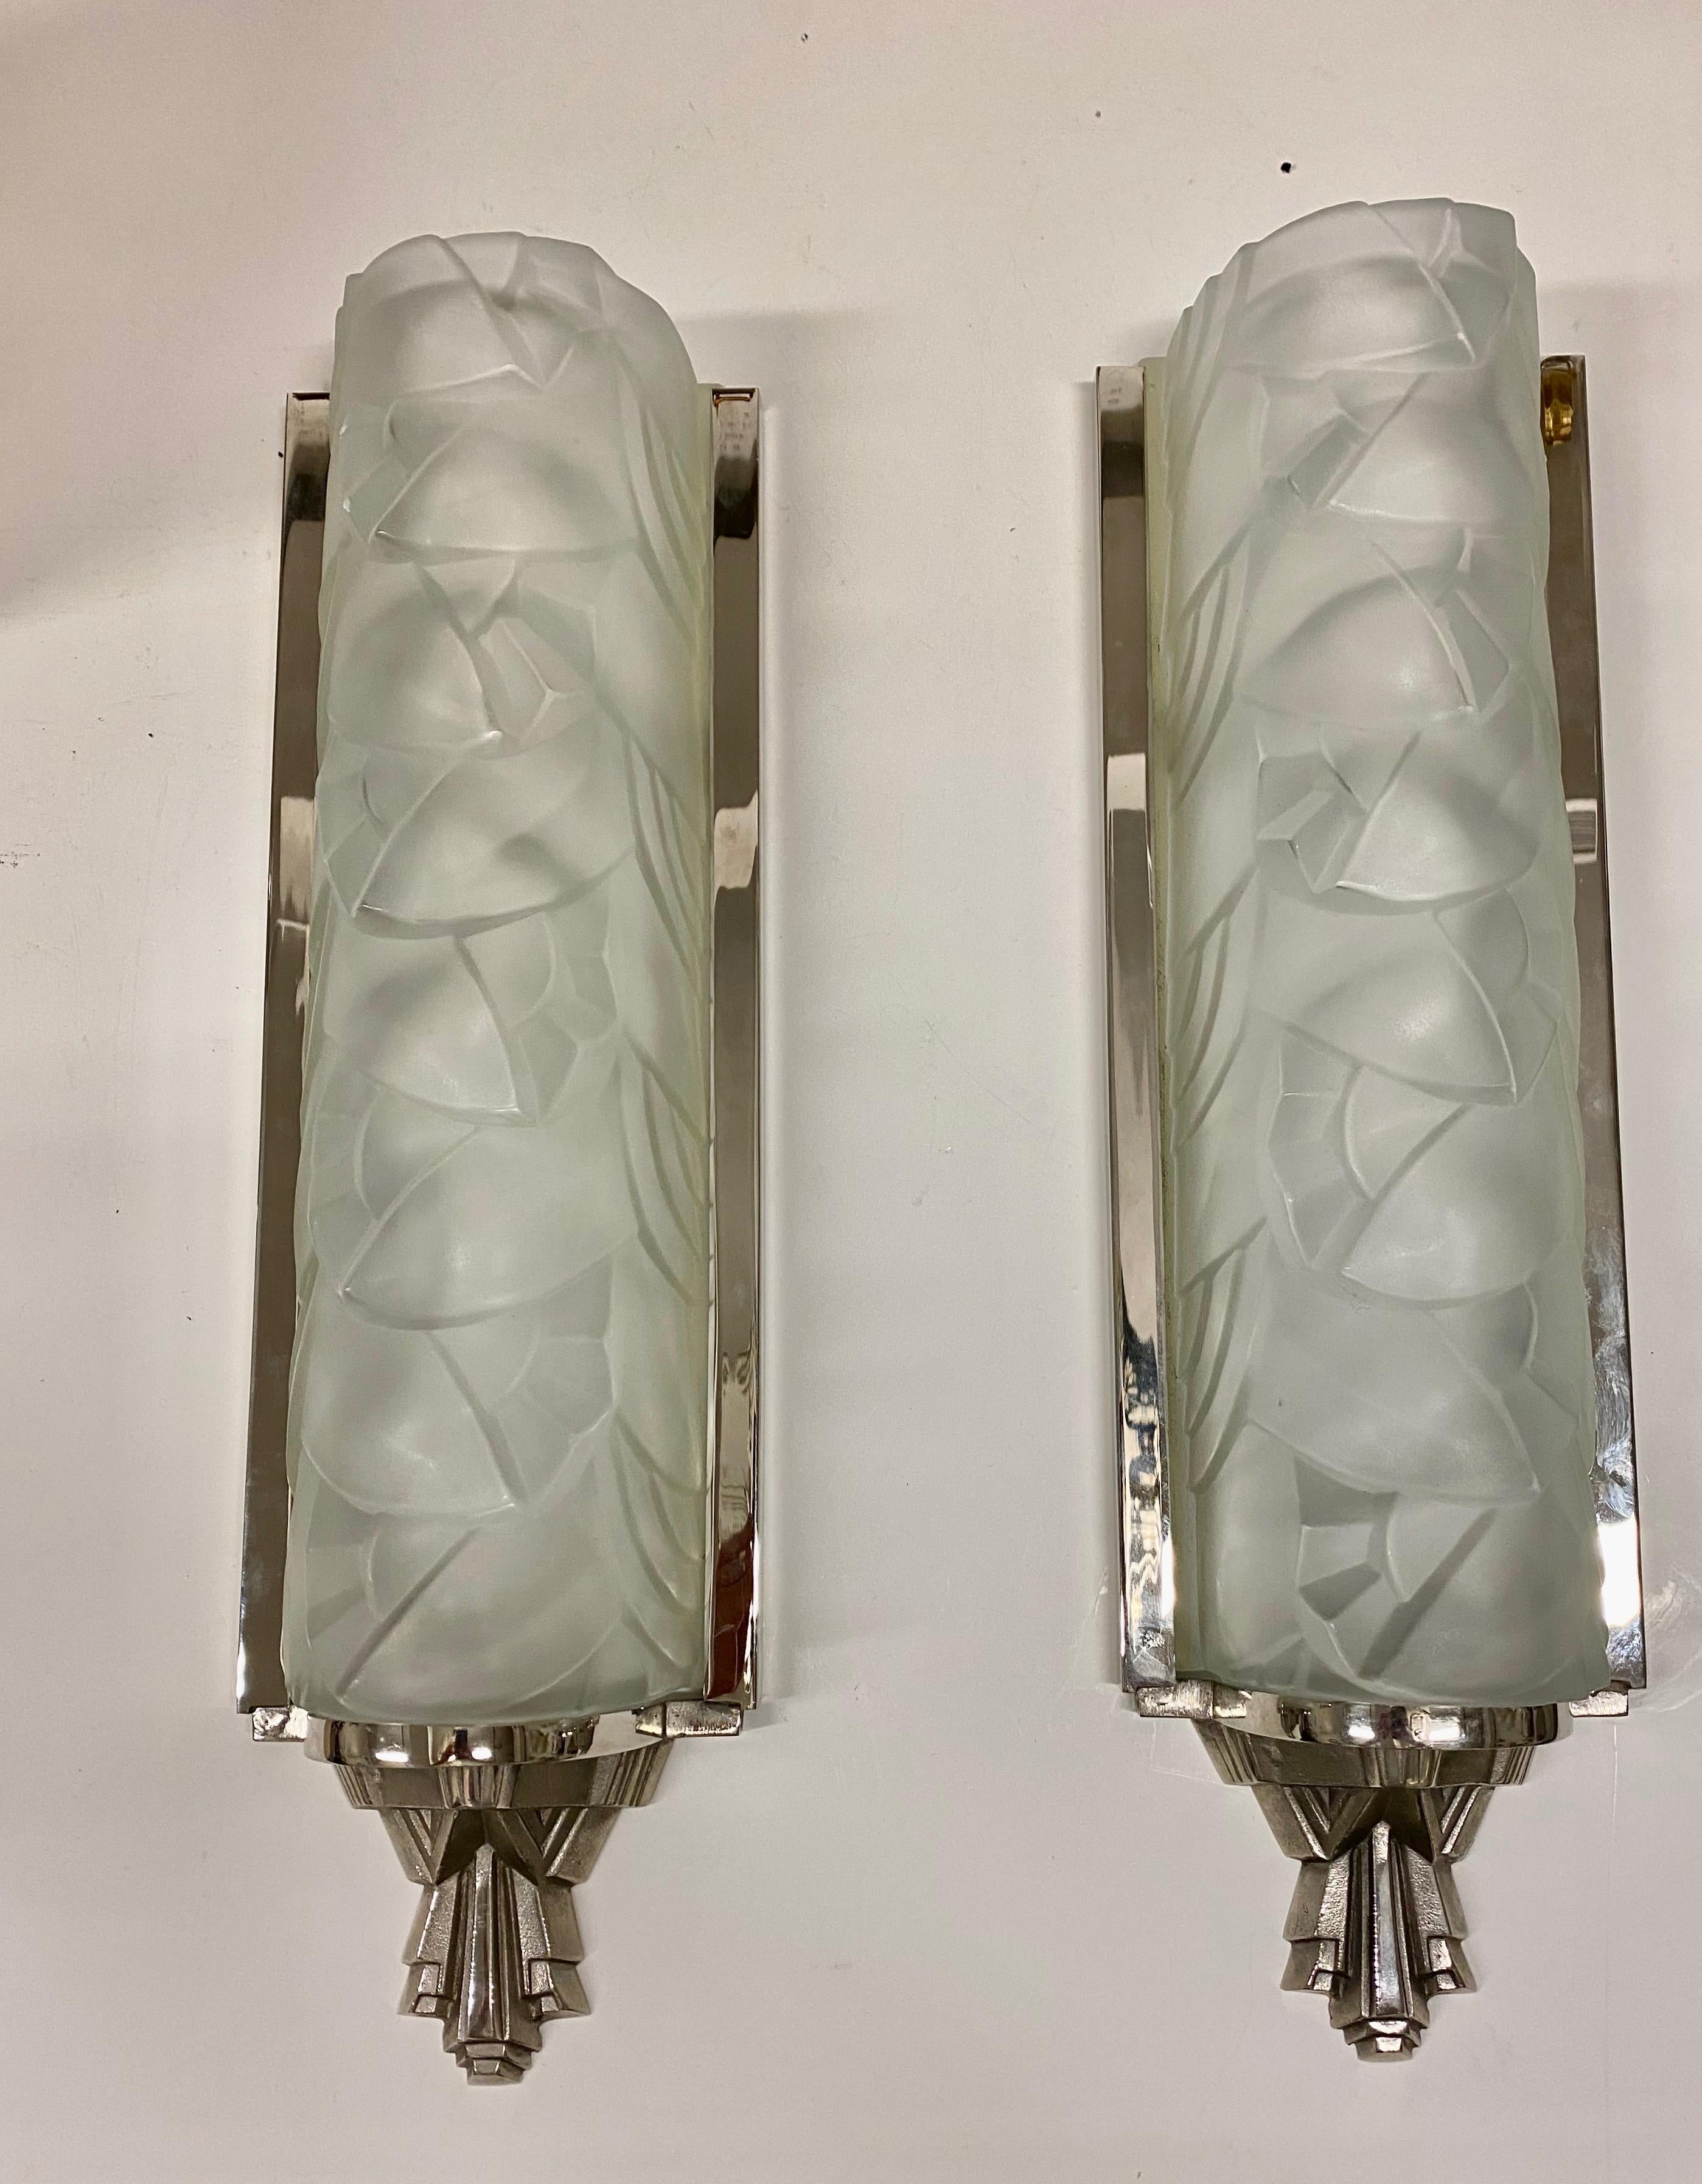 Grand pair of French Art Deco wall sconces by the French artist “Degue”. Having clear frosted glass shades with geometric and floral motif. Held in a geometric deco design frame in nickel. Each shade is marked Degue. Has been rewired for American